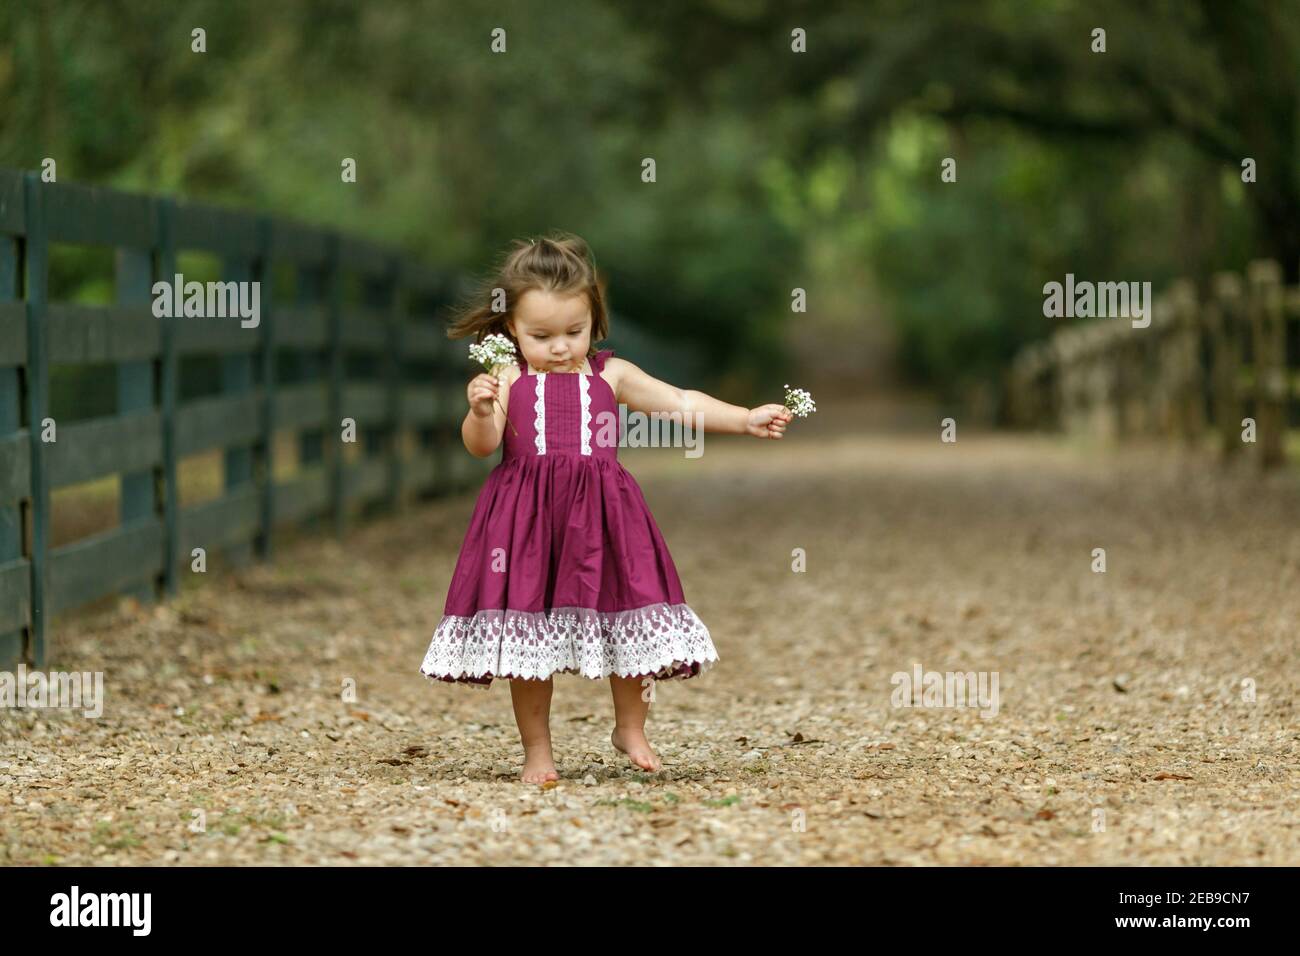 Beautiful two year old girl with a purple dress running and jumping with happiness. Stock Photo